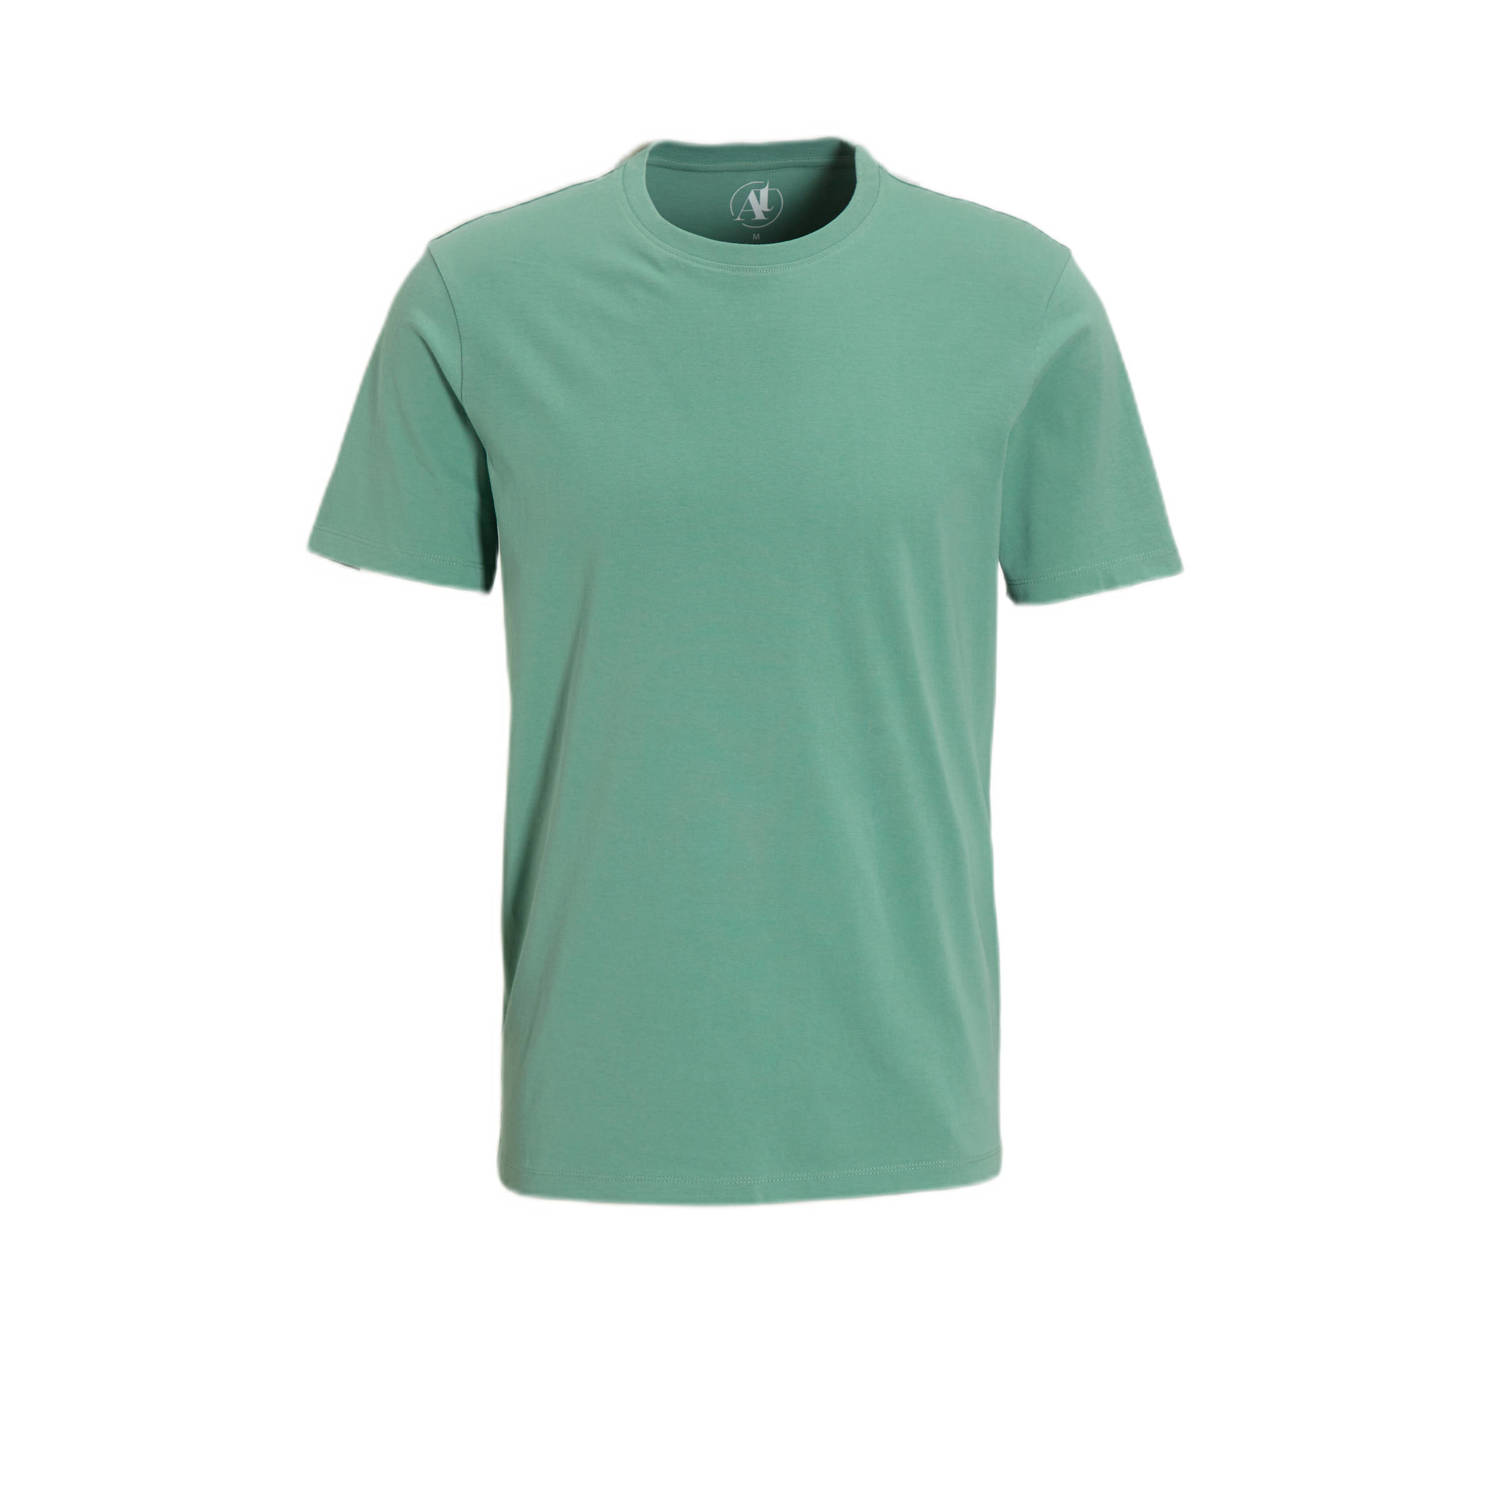 Anytime T-shirt teal